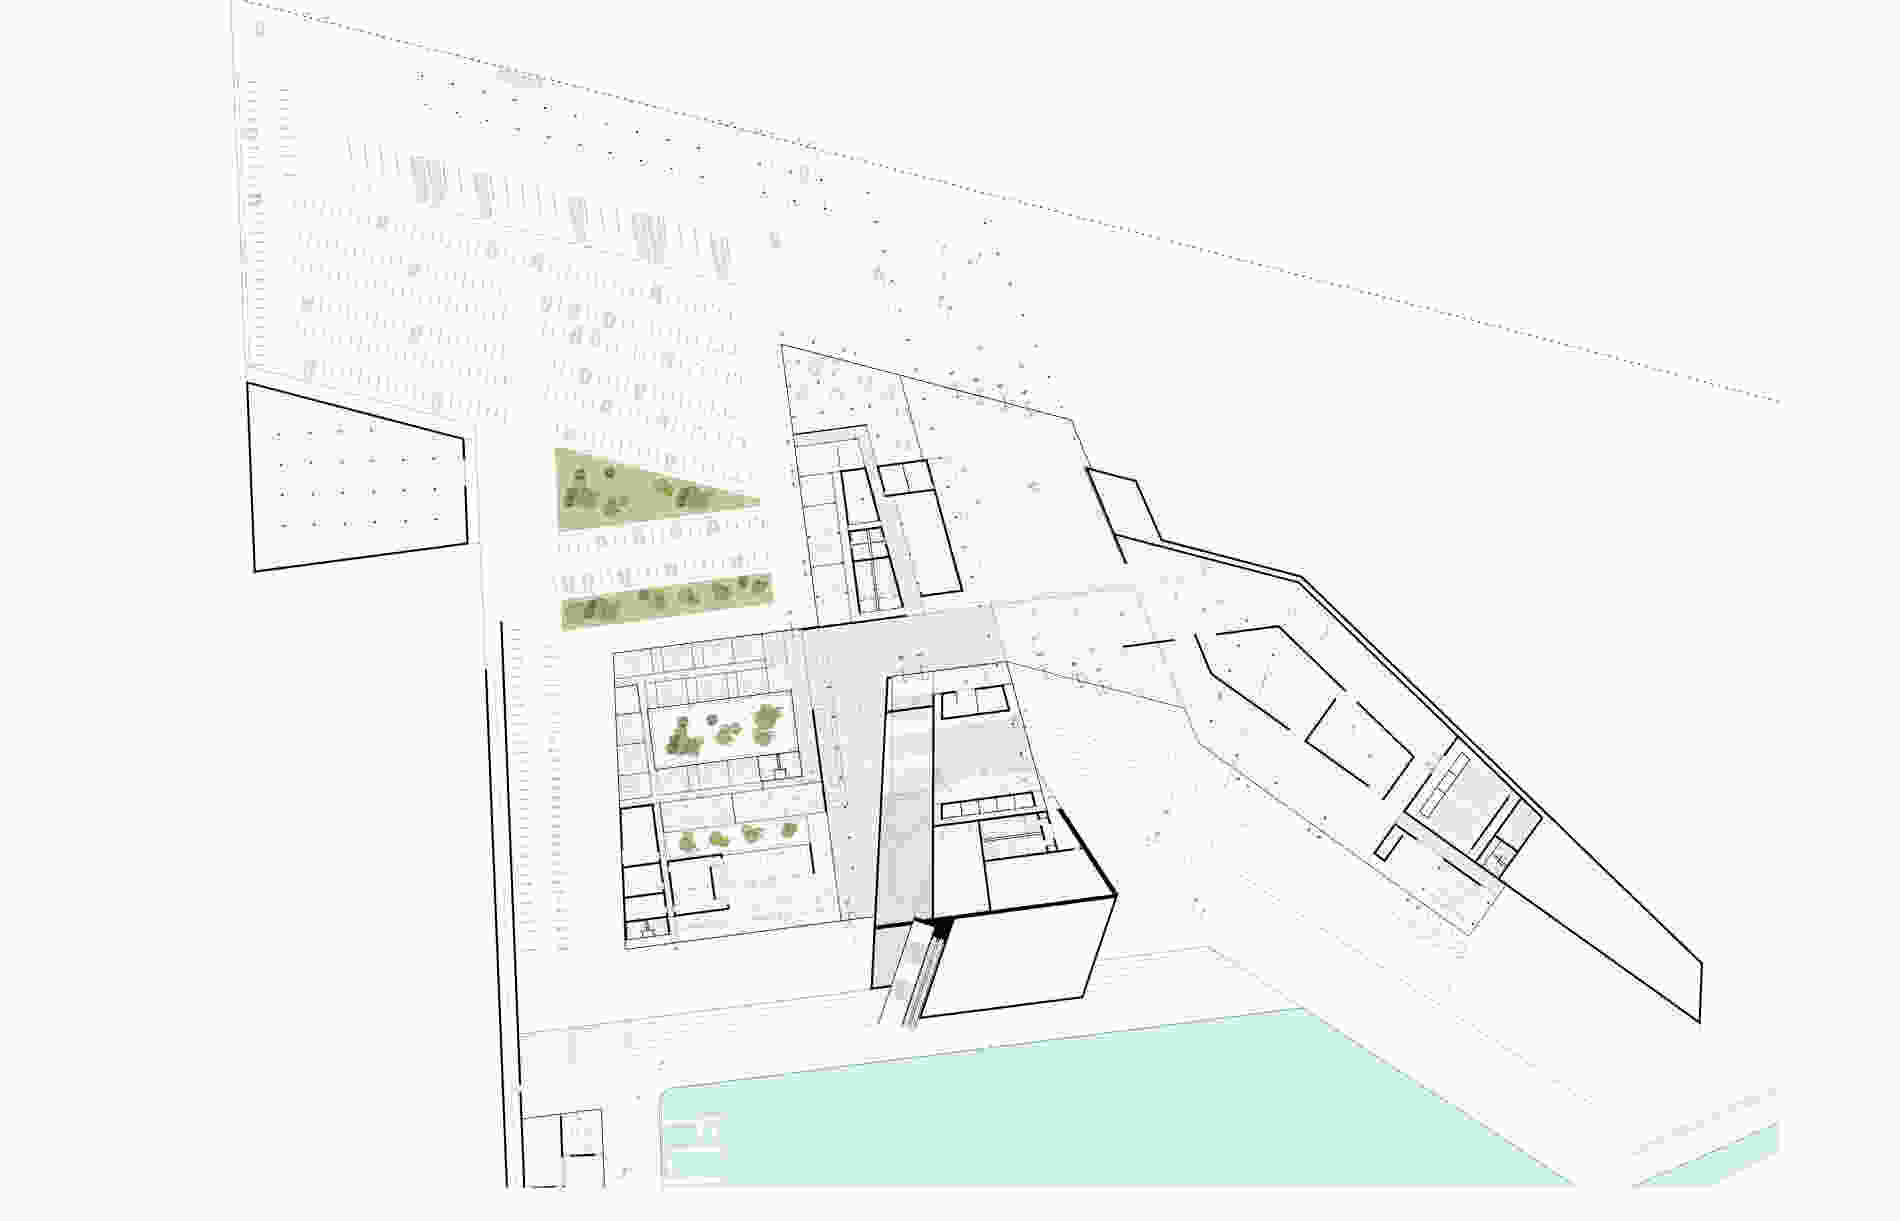 338 dmaa plan 01 entrance building and natural museum ground floor plan